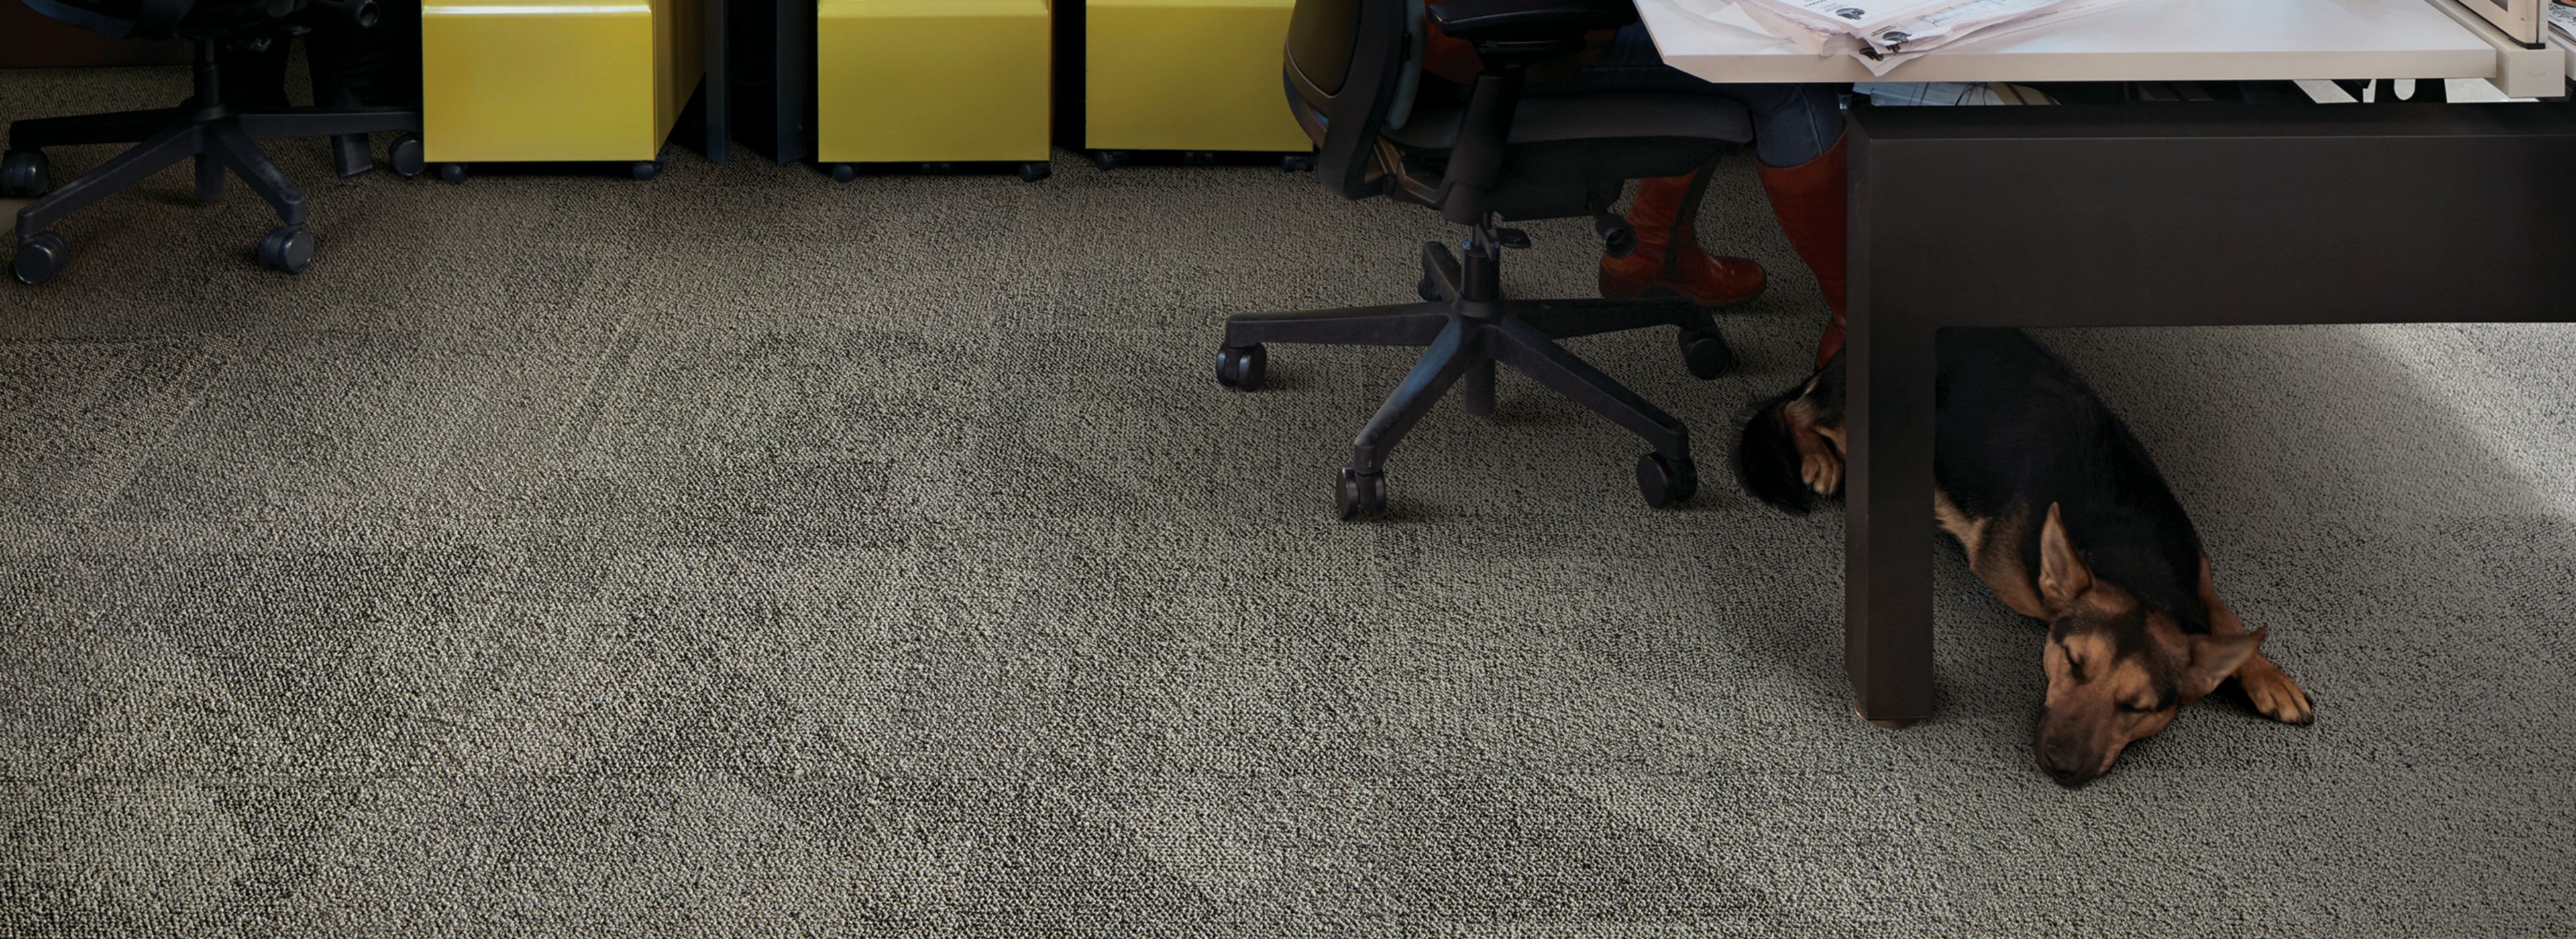 Interface Paver carpet tile and HN850 plank carpet tile in open office area with multiple people working at desk afbeeldingnummer 1